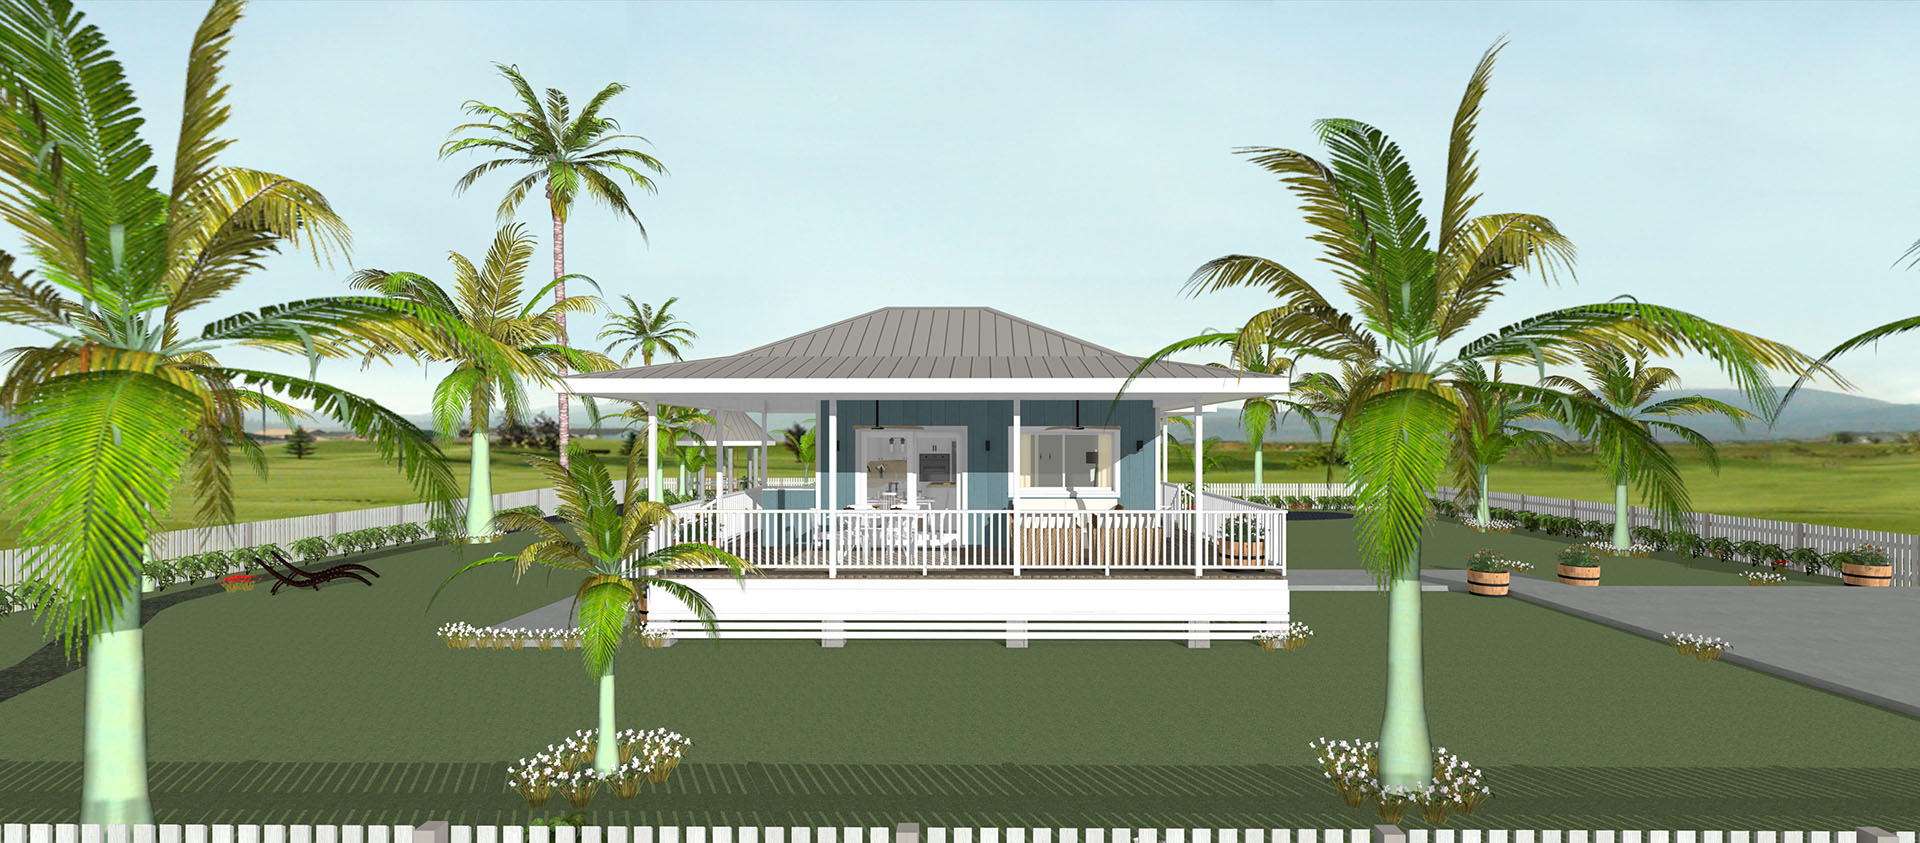 The front view of a blue house with a grey roof, wooden deck, and palm trees